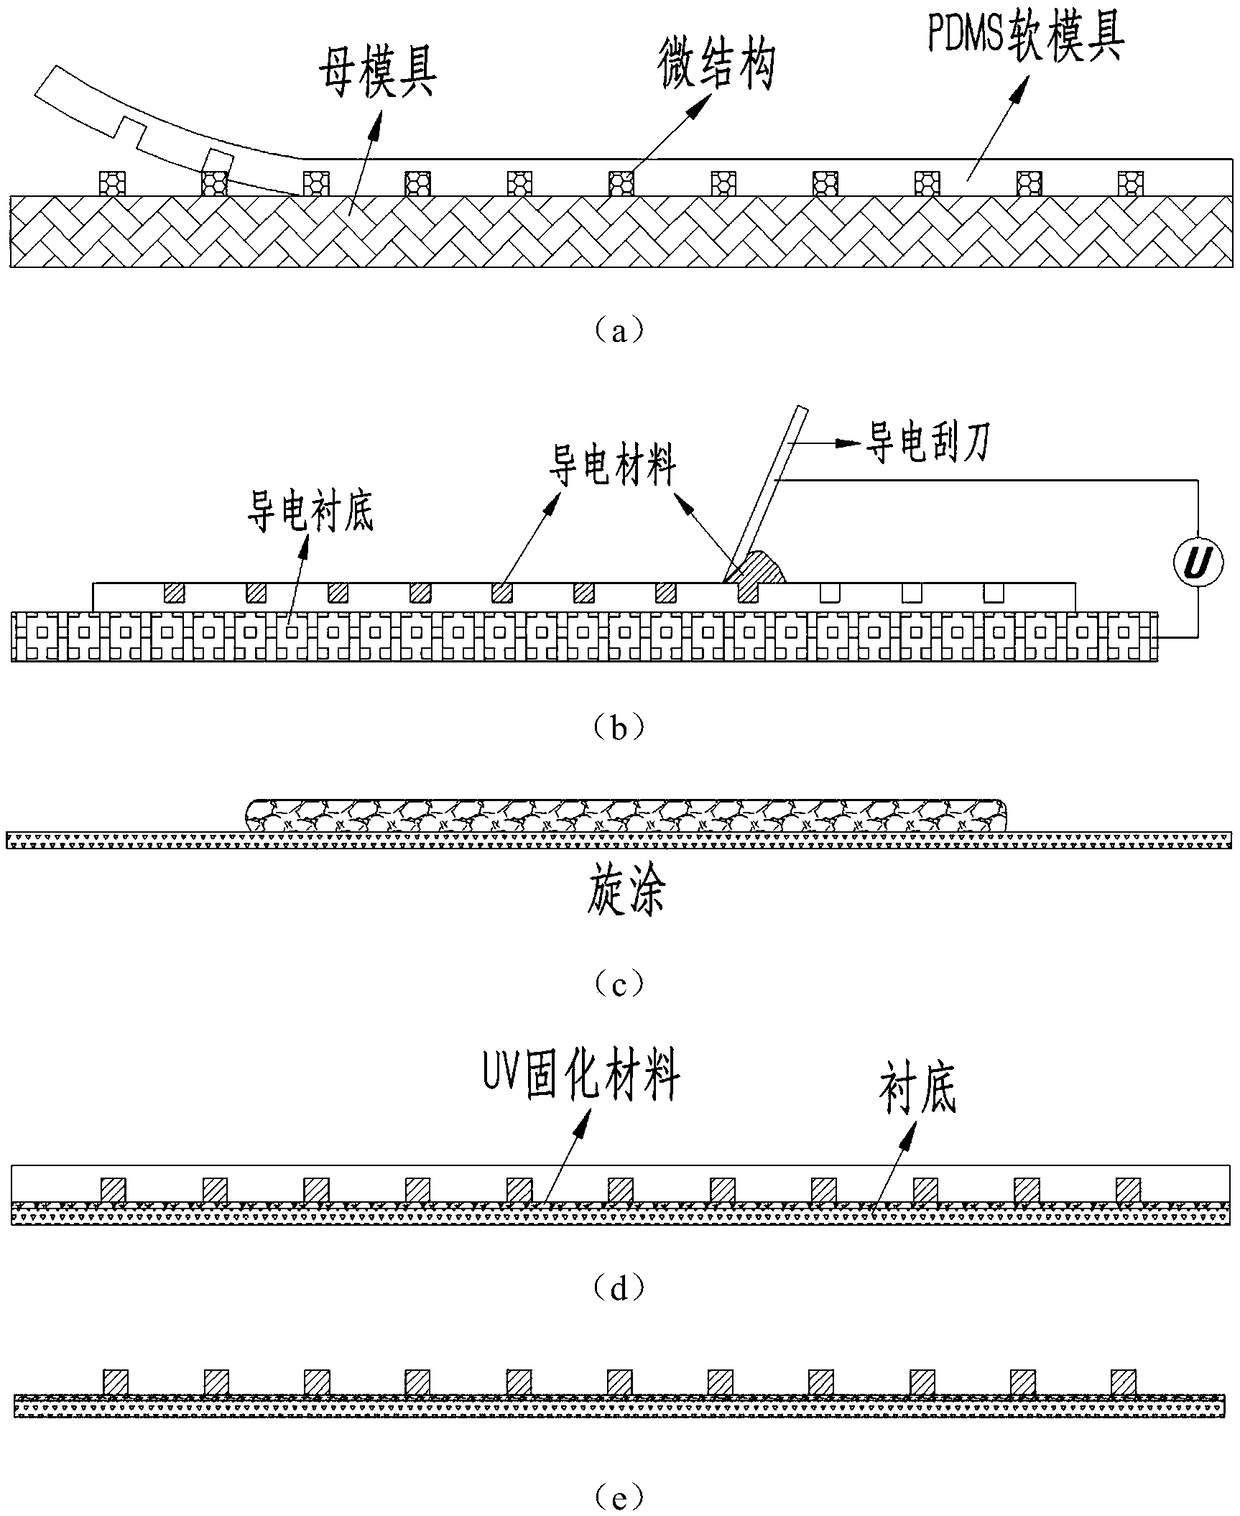 Large-height-width-ratio microstructure transfer printing method